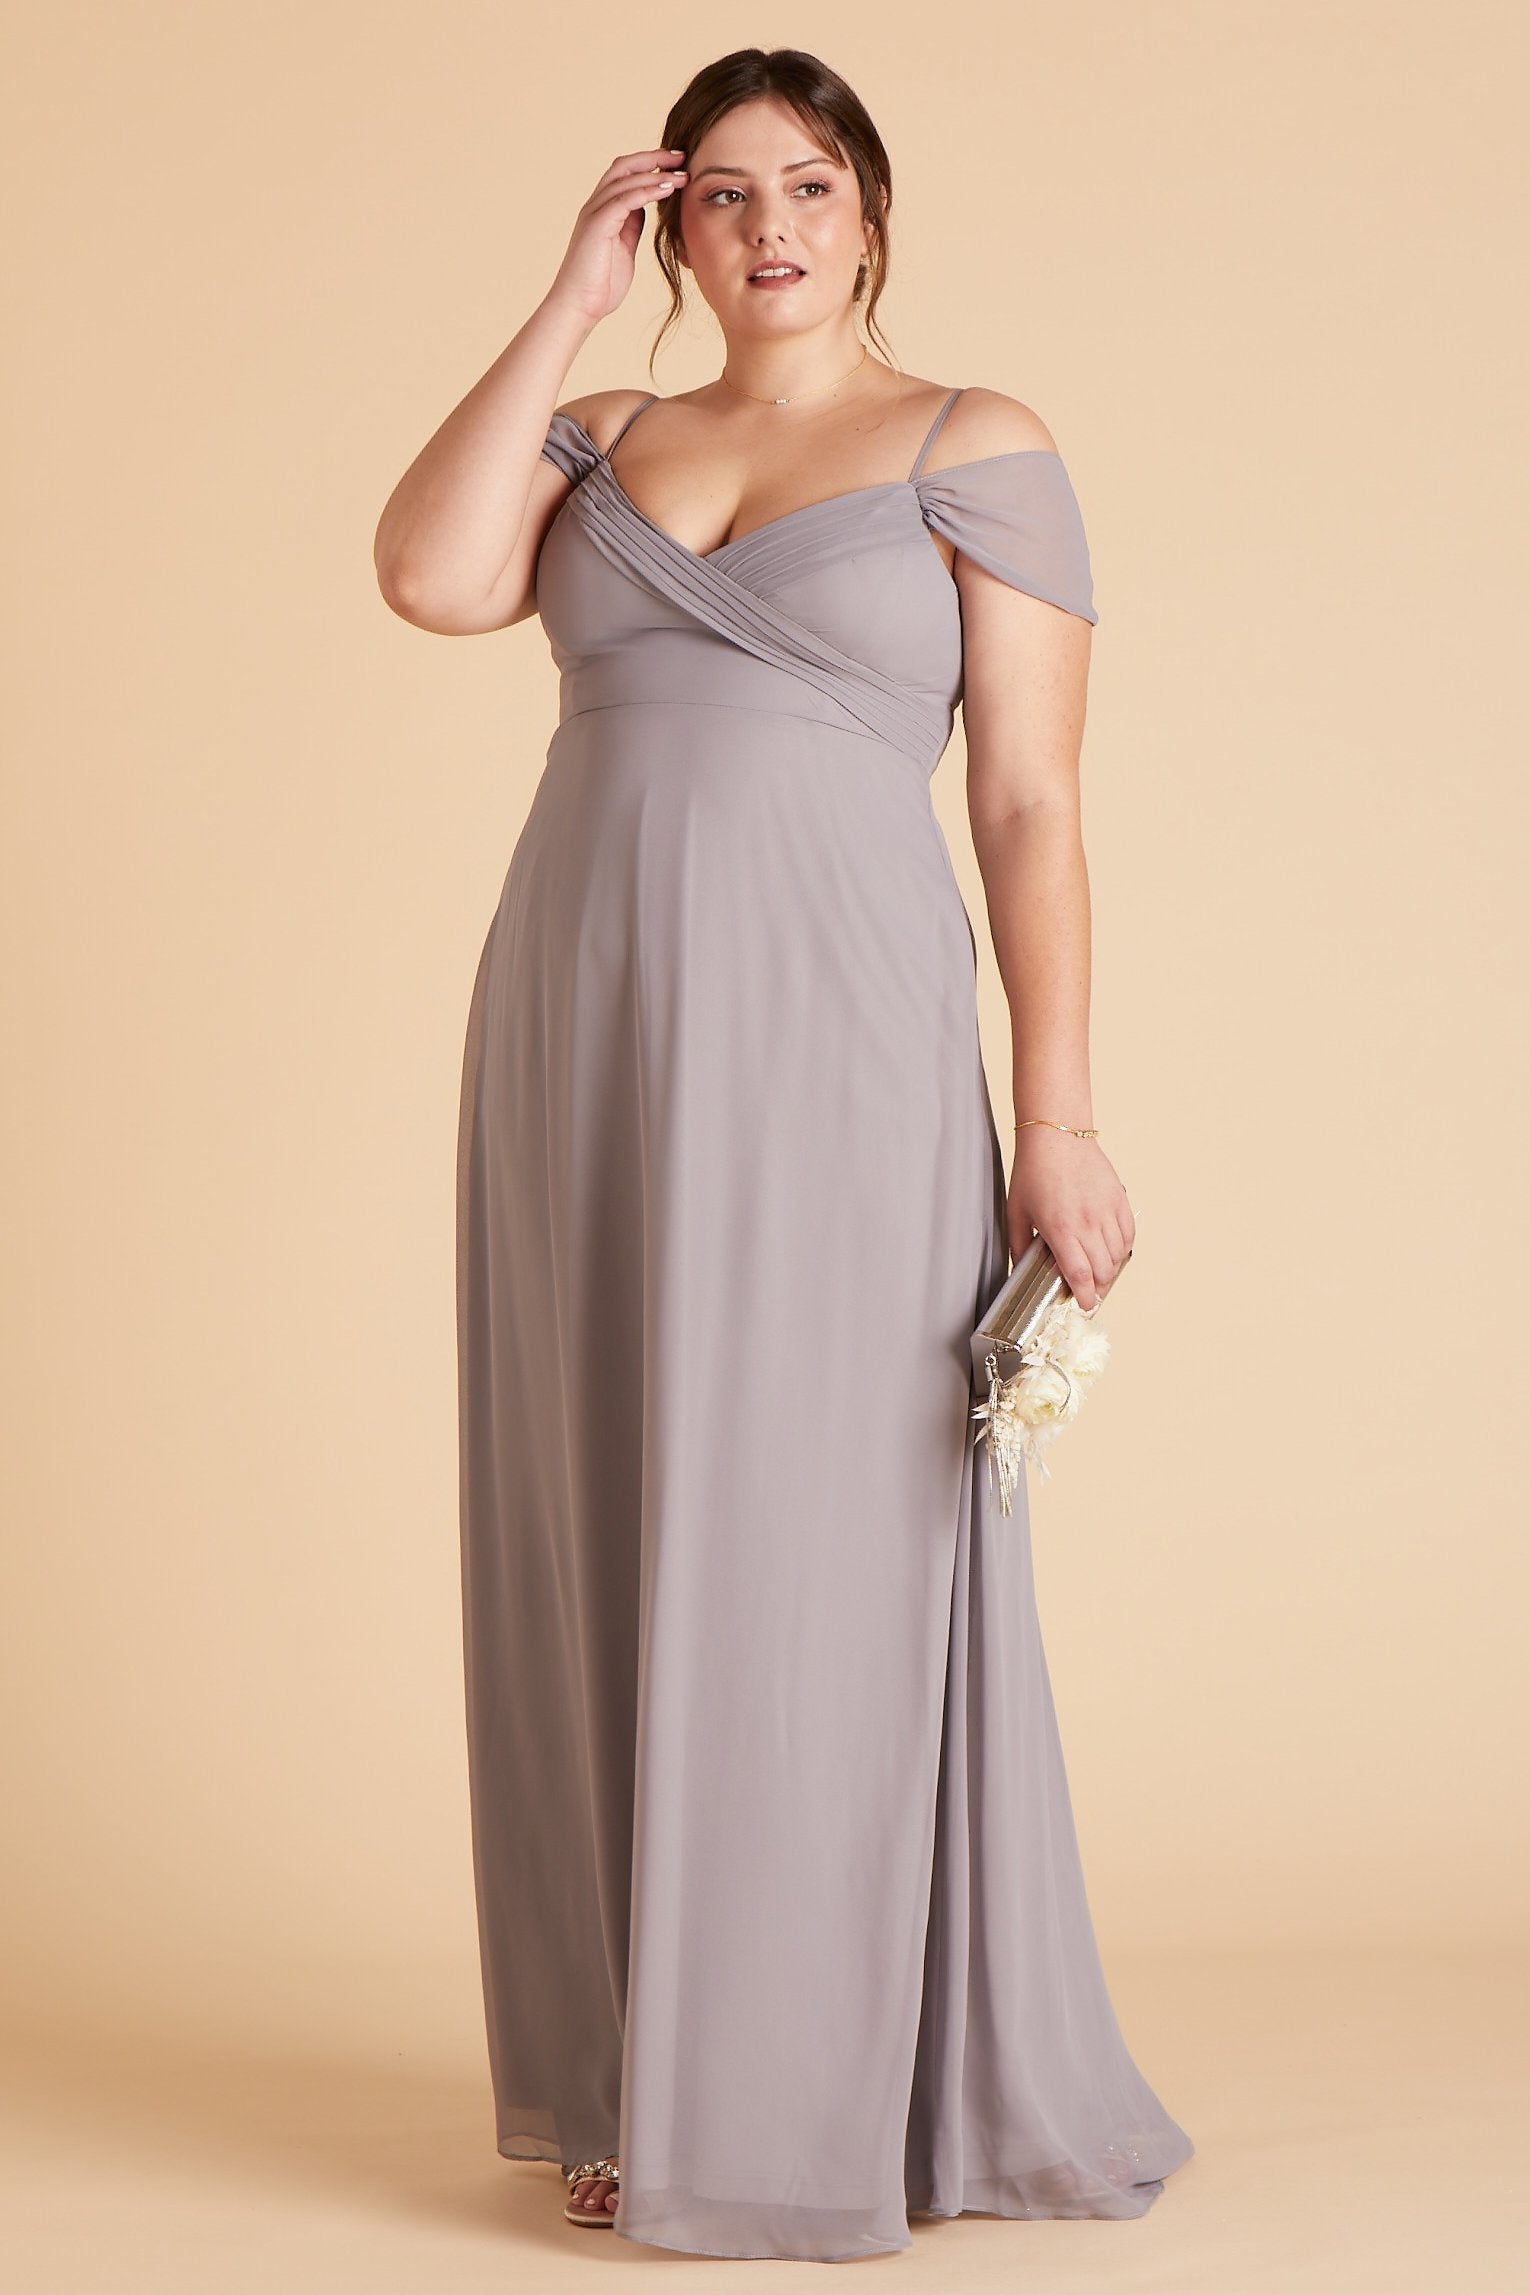 Spence convertible plus size bridesmaids dress in silver chiffon by Birdy Grey, front view